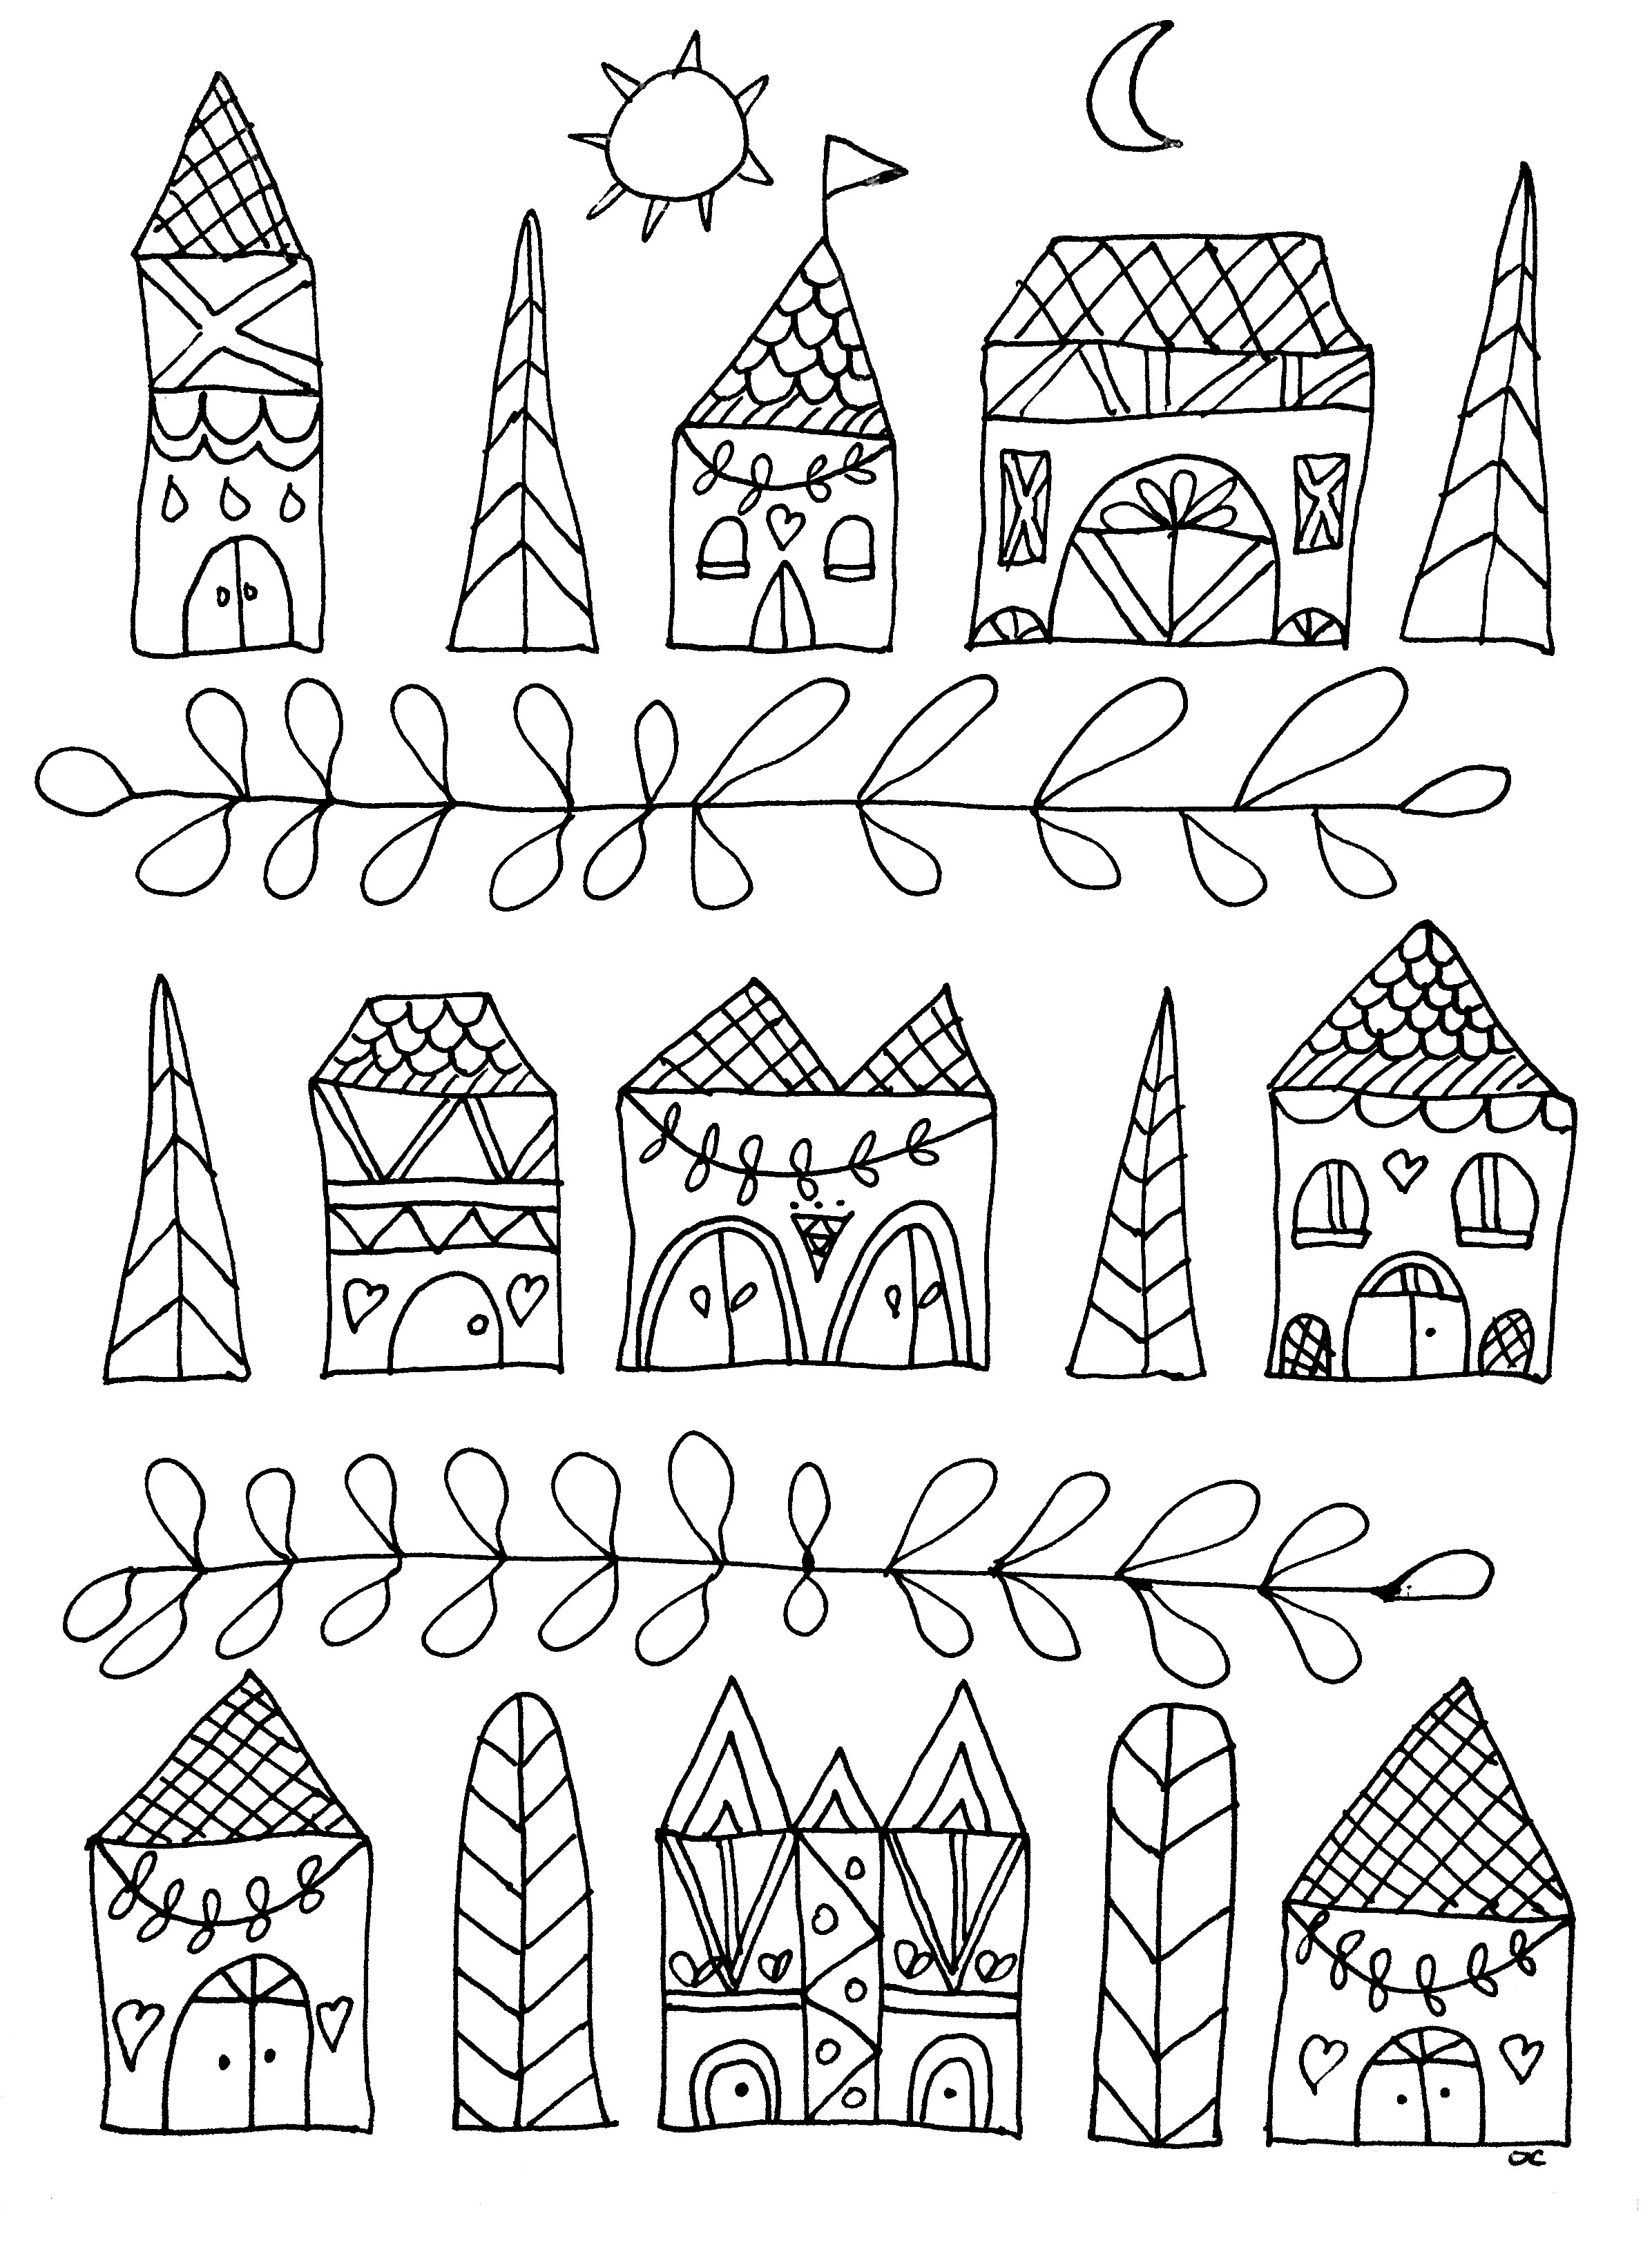 Download Simple houses - Anti stress Adult Coloring Pages - Page 6